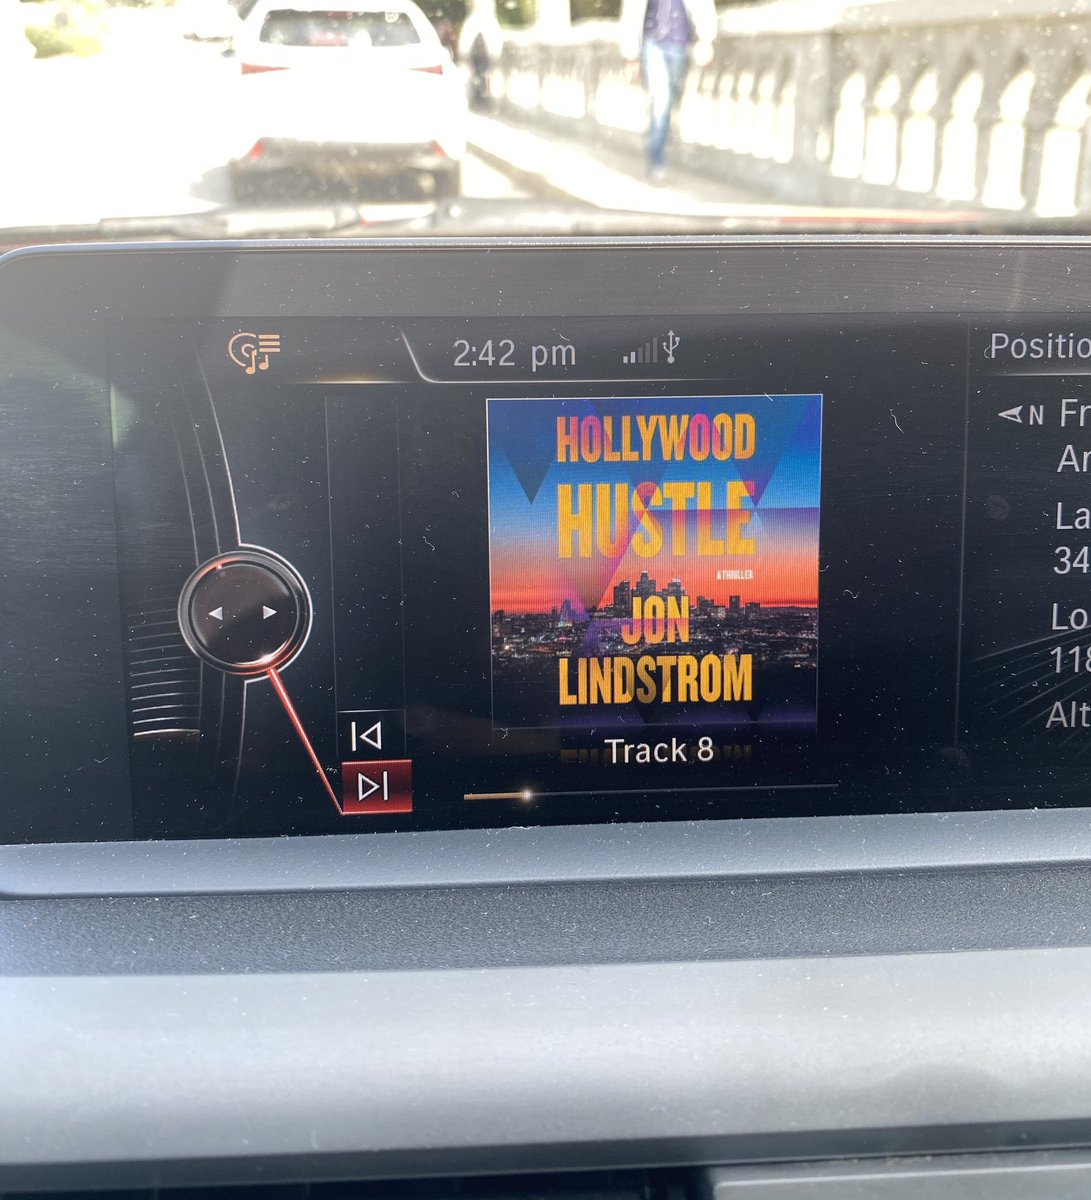 Listening to @thejonlindstrom read his new book, Hollywood Hustle, on @Spotify … makes for a pretty sweet commute… soooo good!!!! ⭐️ ⭐️⭐️⭐️⭐️